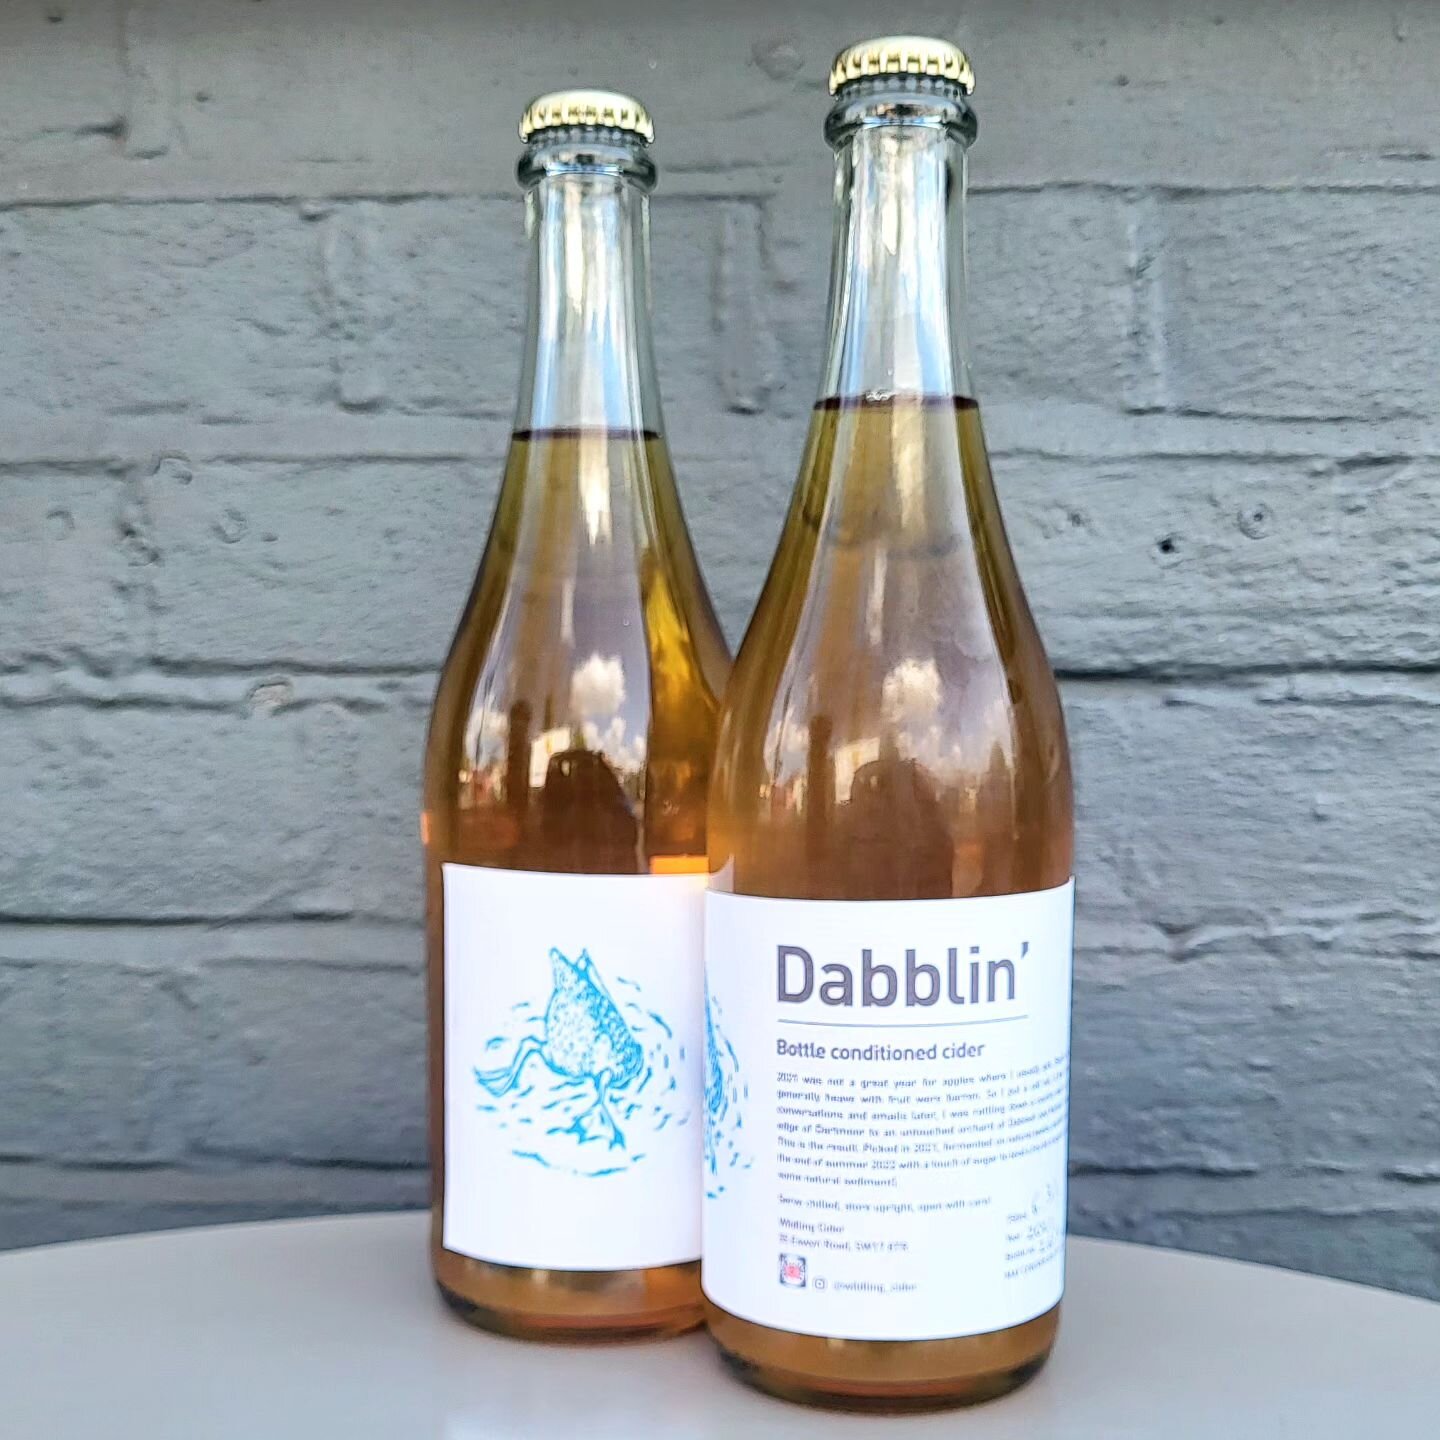 We have the fantastic @wildling_cider  in store.  #britishciderweek 

Dabblin'
6.3%

Picked in 2021 from Dabinett and Michelin trees.  Fermented on natural yeasts and bottled at the end of summer 2022 with a touch of sugar to lend a tiny bit of spark